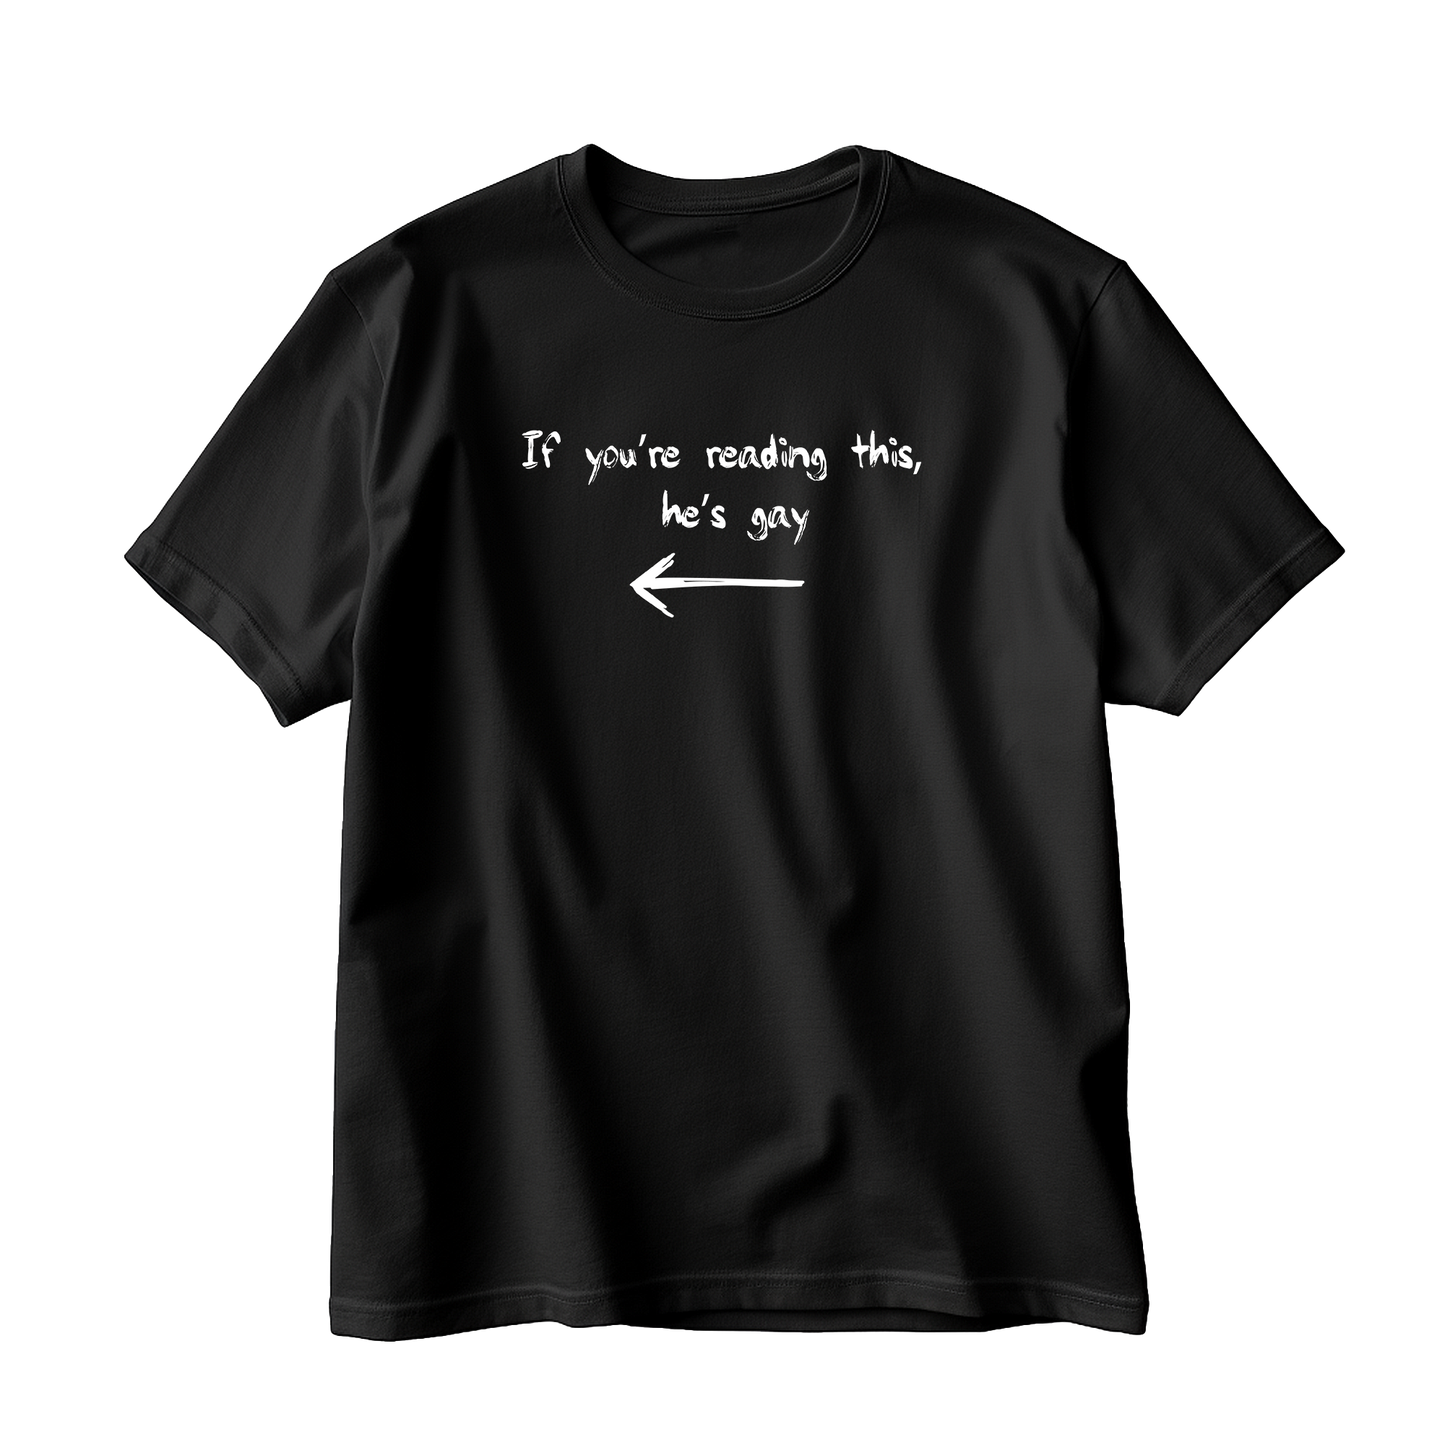 If You're Reading This Right Side T-Shirt